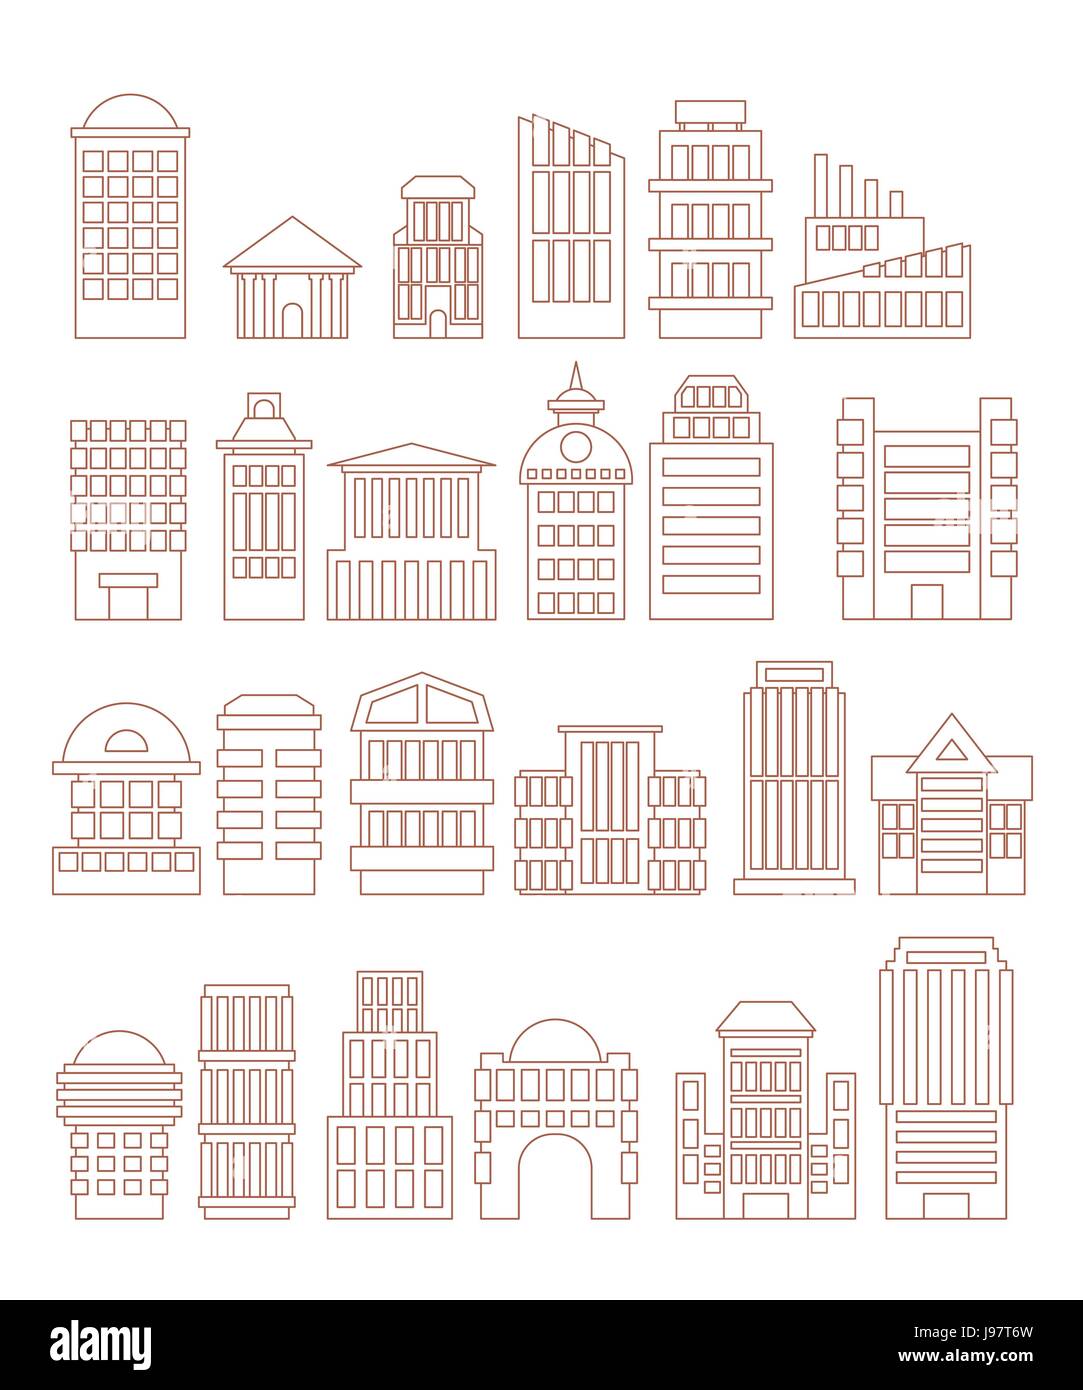 Set  buildings  icons. Public and administrative complexes. Large business centers. Skyscrapers and towers. Urban structure. Urban icons of lines. Ele Stock Vector